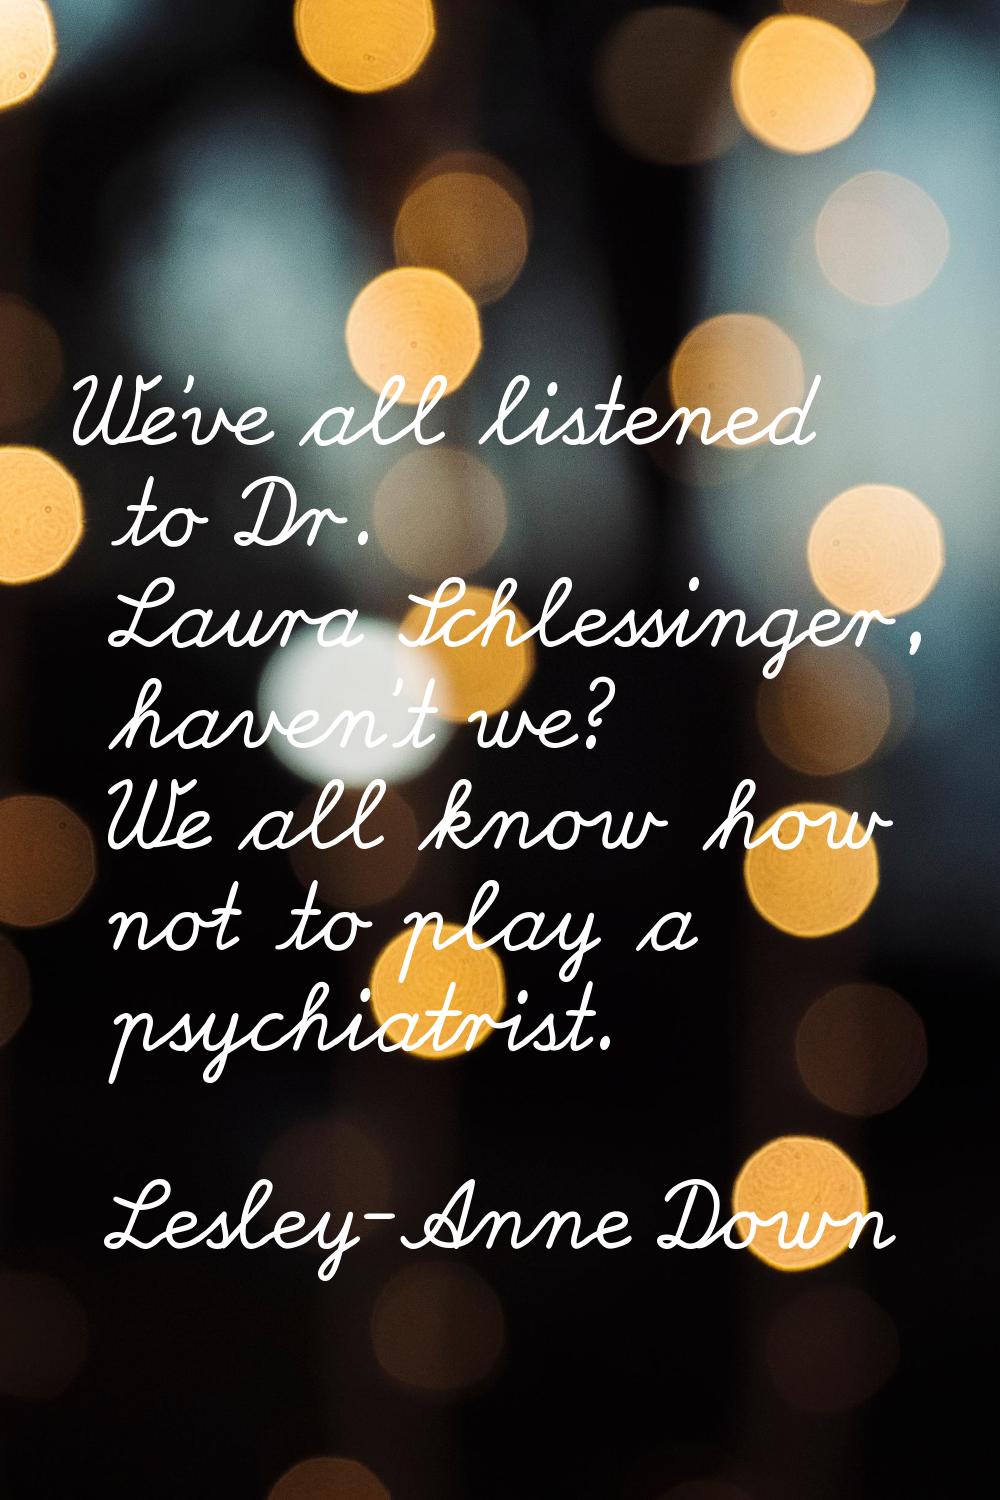 We've all listened to Dr. Laura Schlessinger, haven't we? We all know how not to play a psychiatris